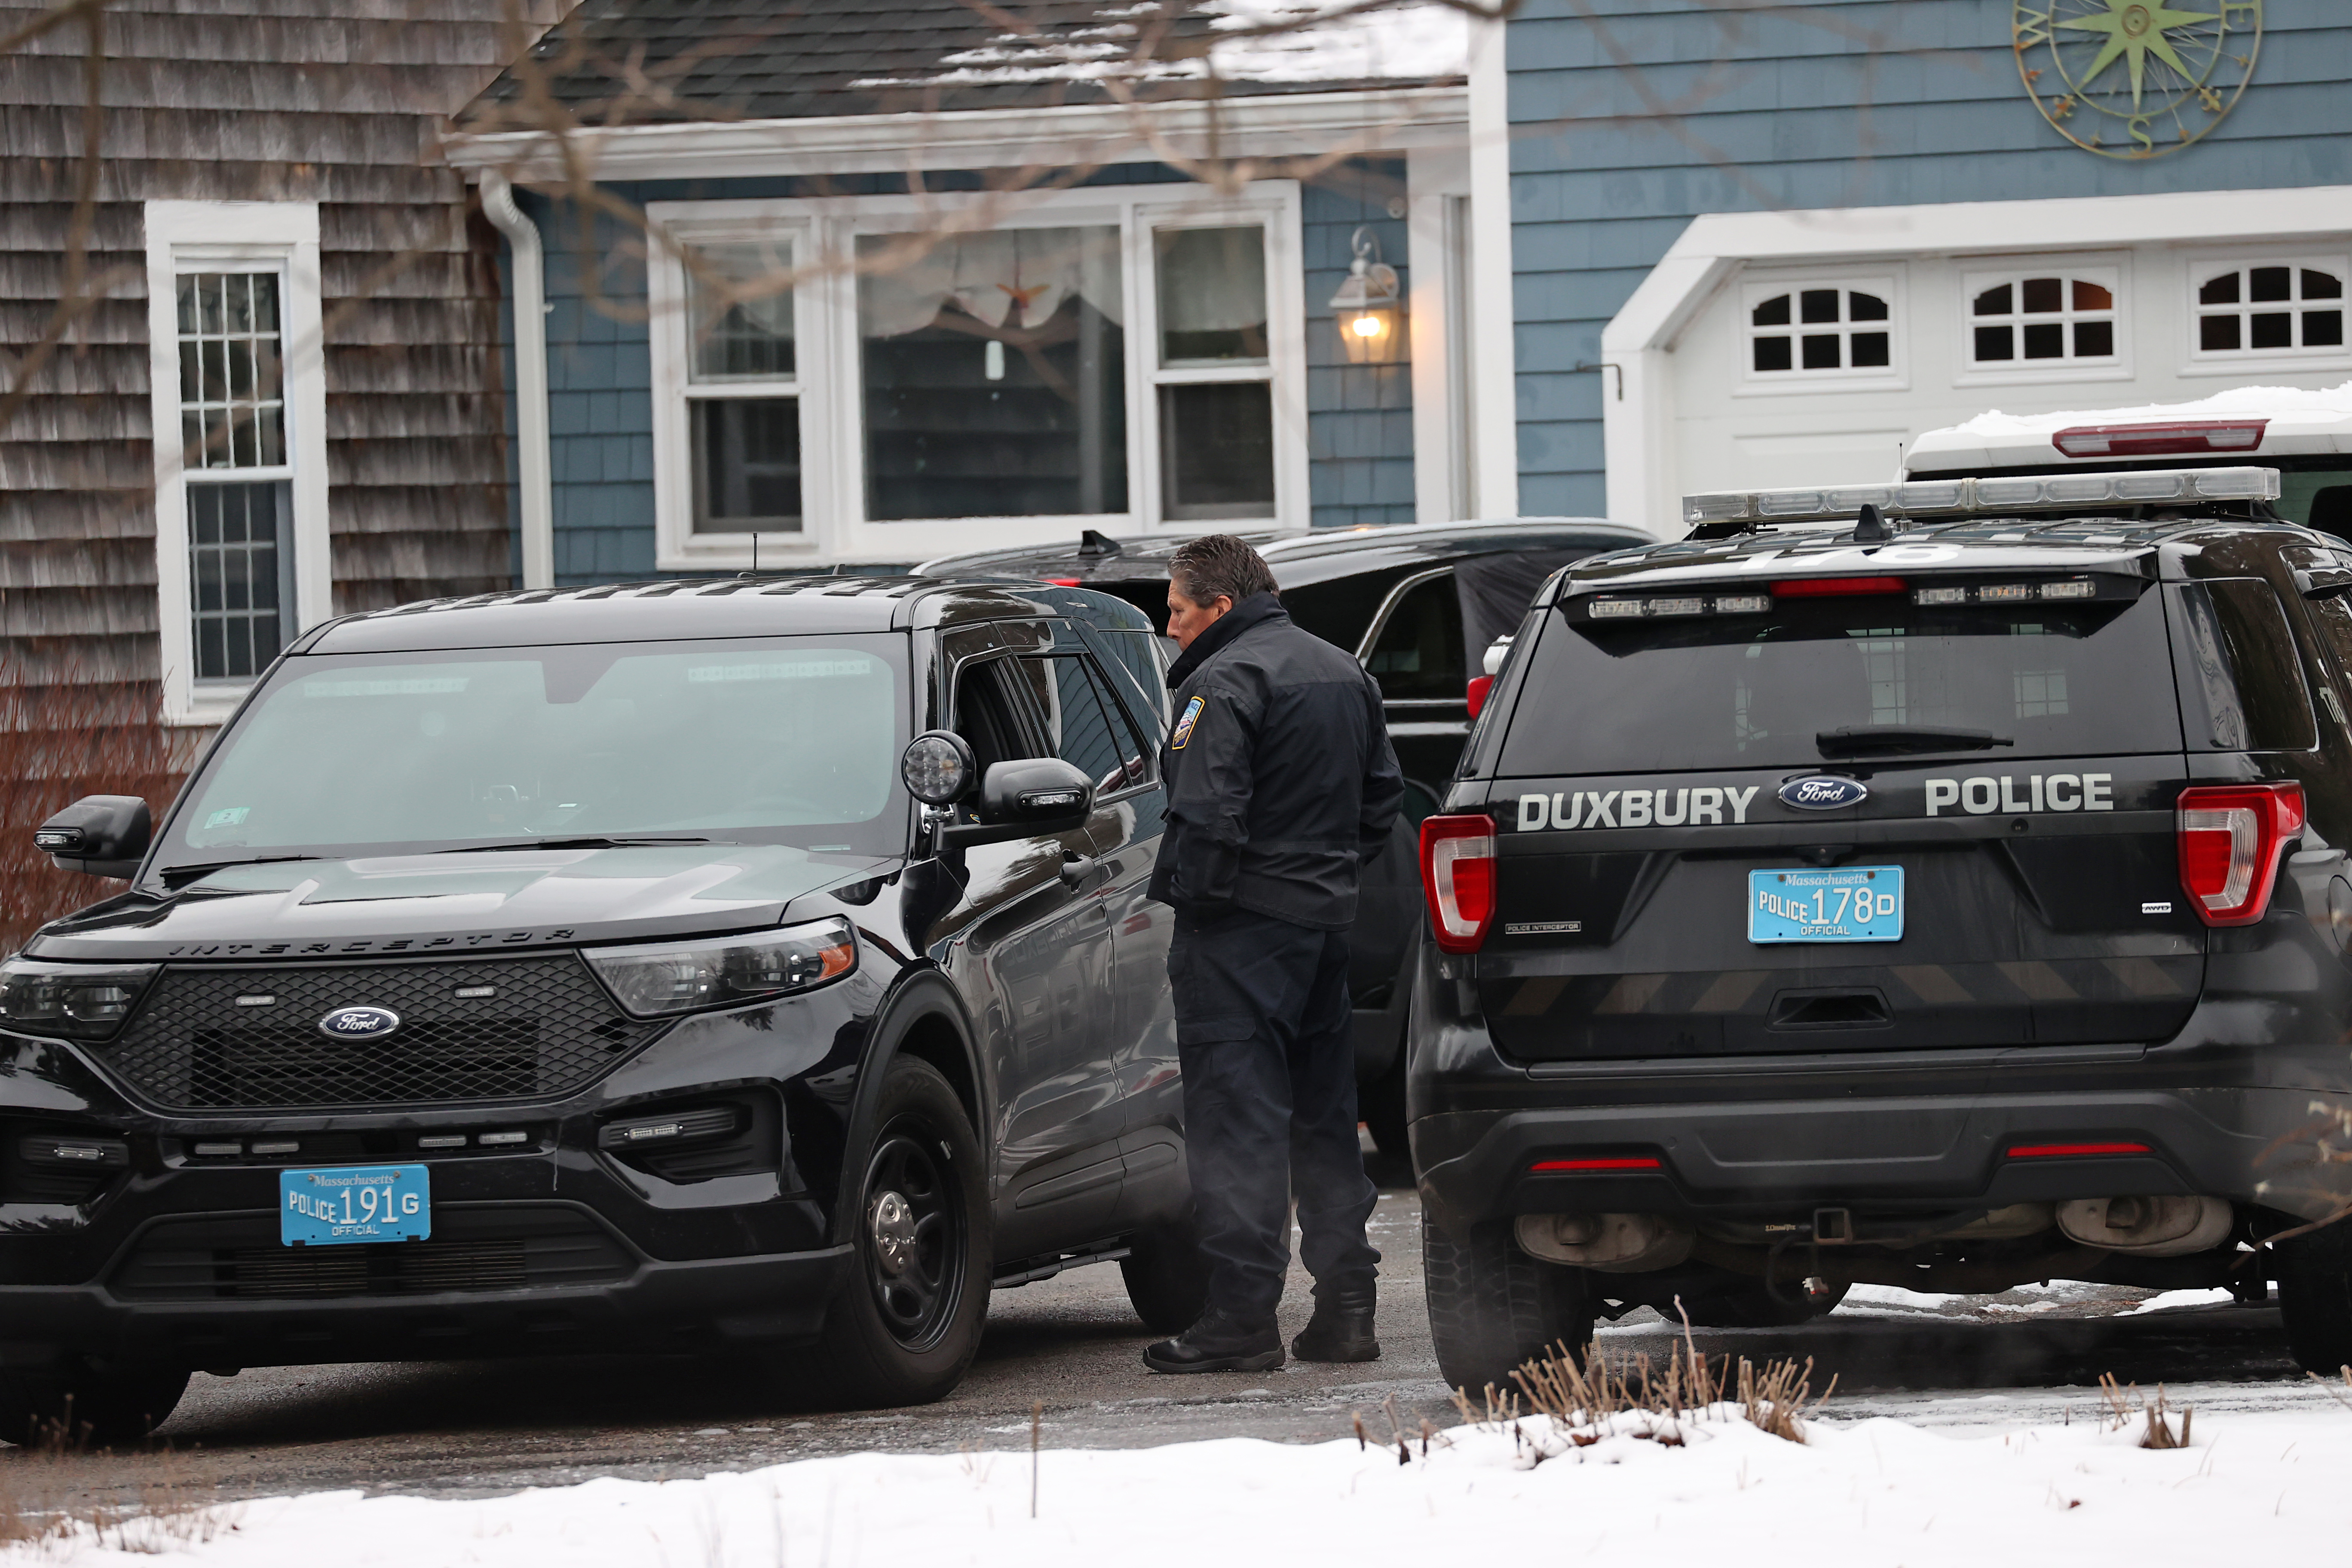 A man reported that a woman had attempted to kill herself at a residence on Duxbury Street in Summer, MA. The bodies of the two deceased children were discovered by the police in the house. Fire and police were called to the home by the man who called from outside 47 Globe Boston.